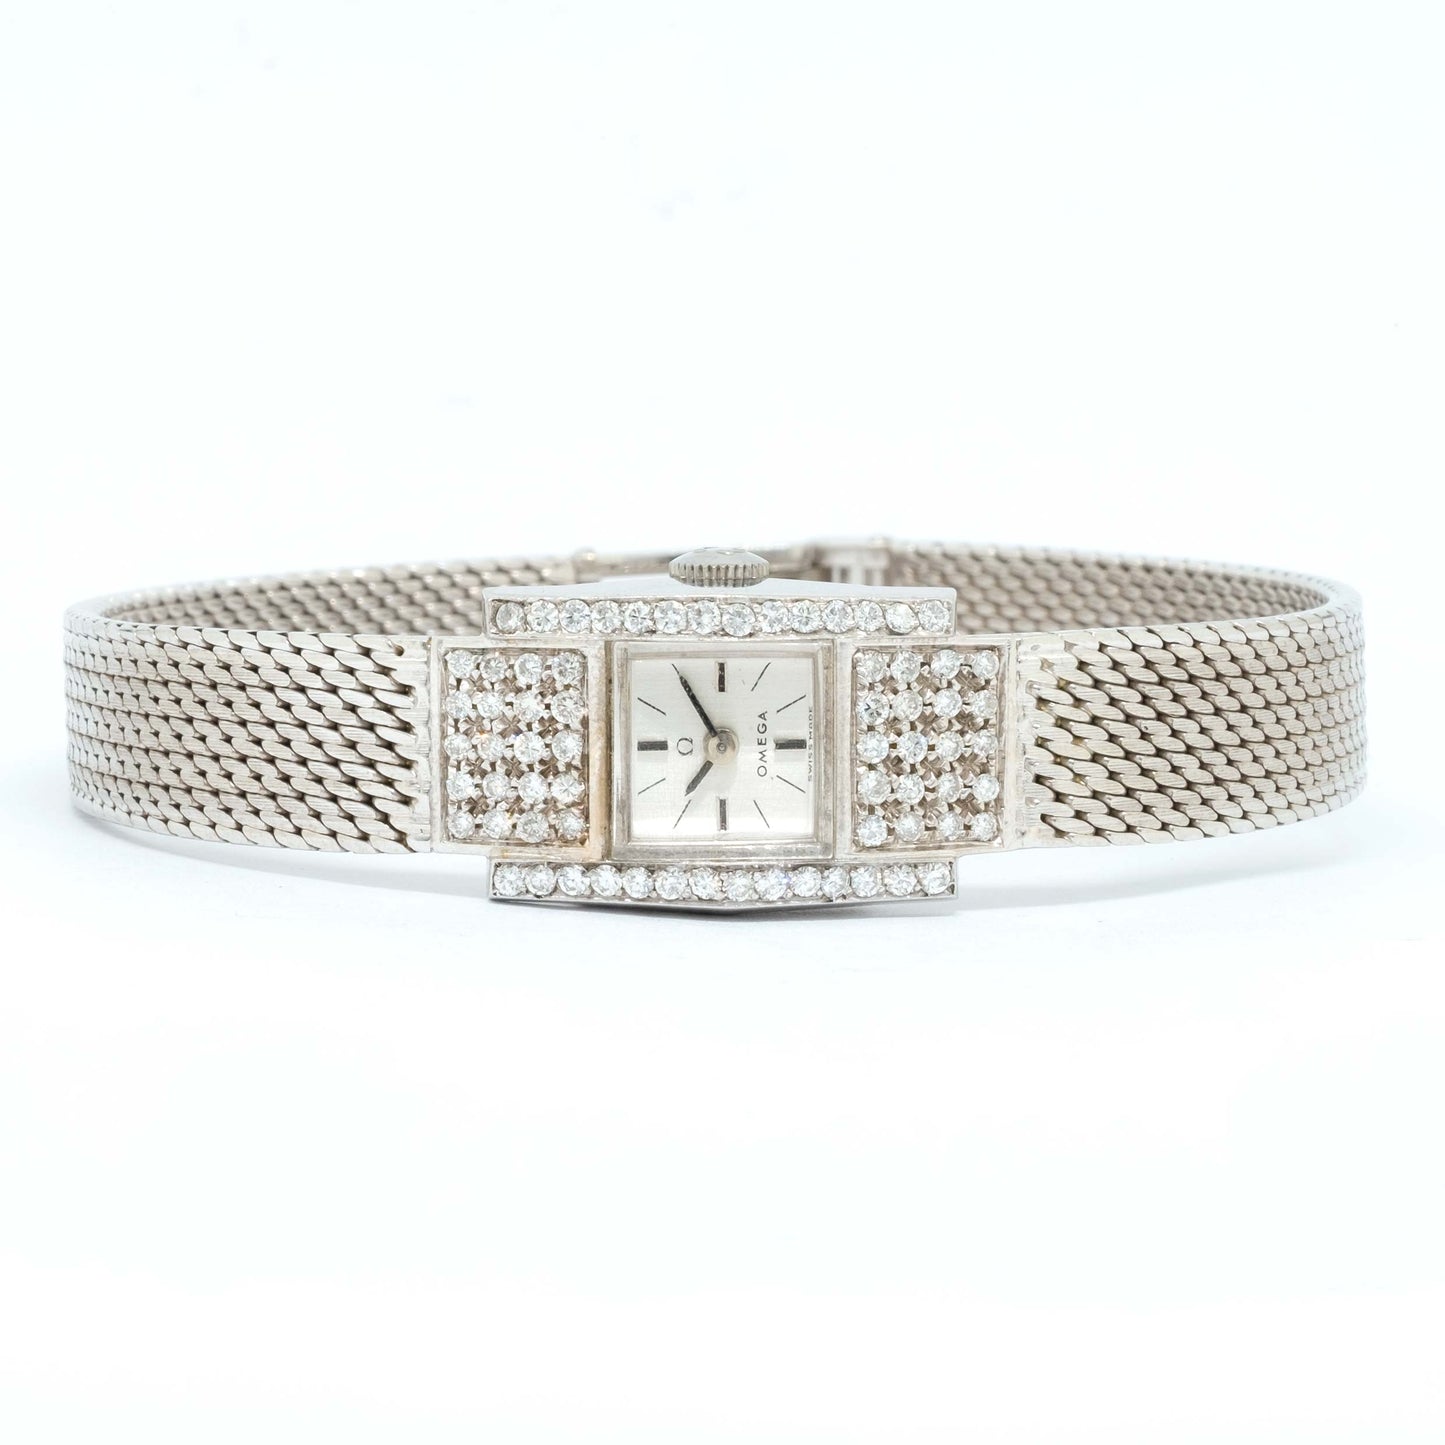 Omega Ladies watch white gold and diamonds